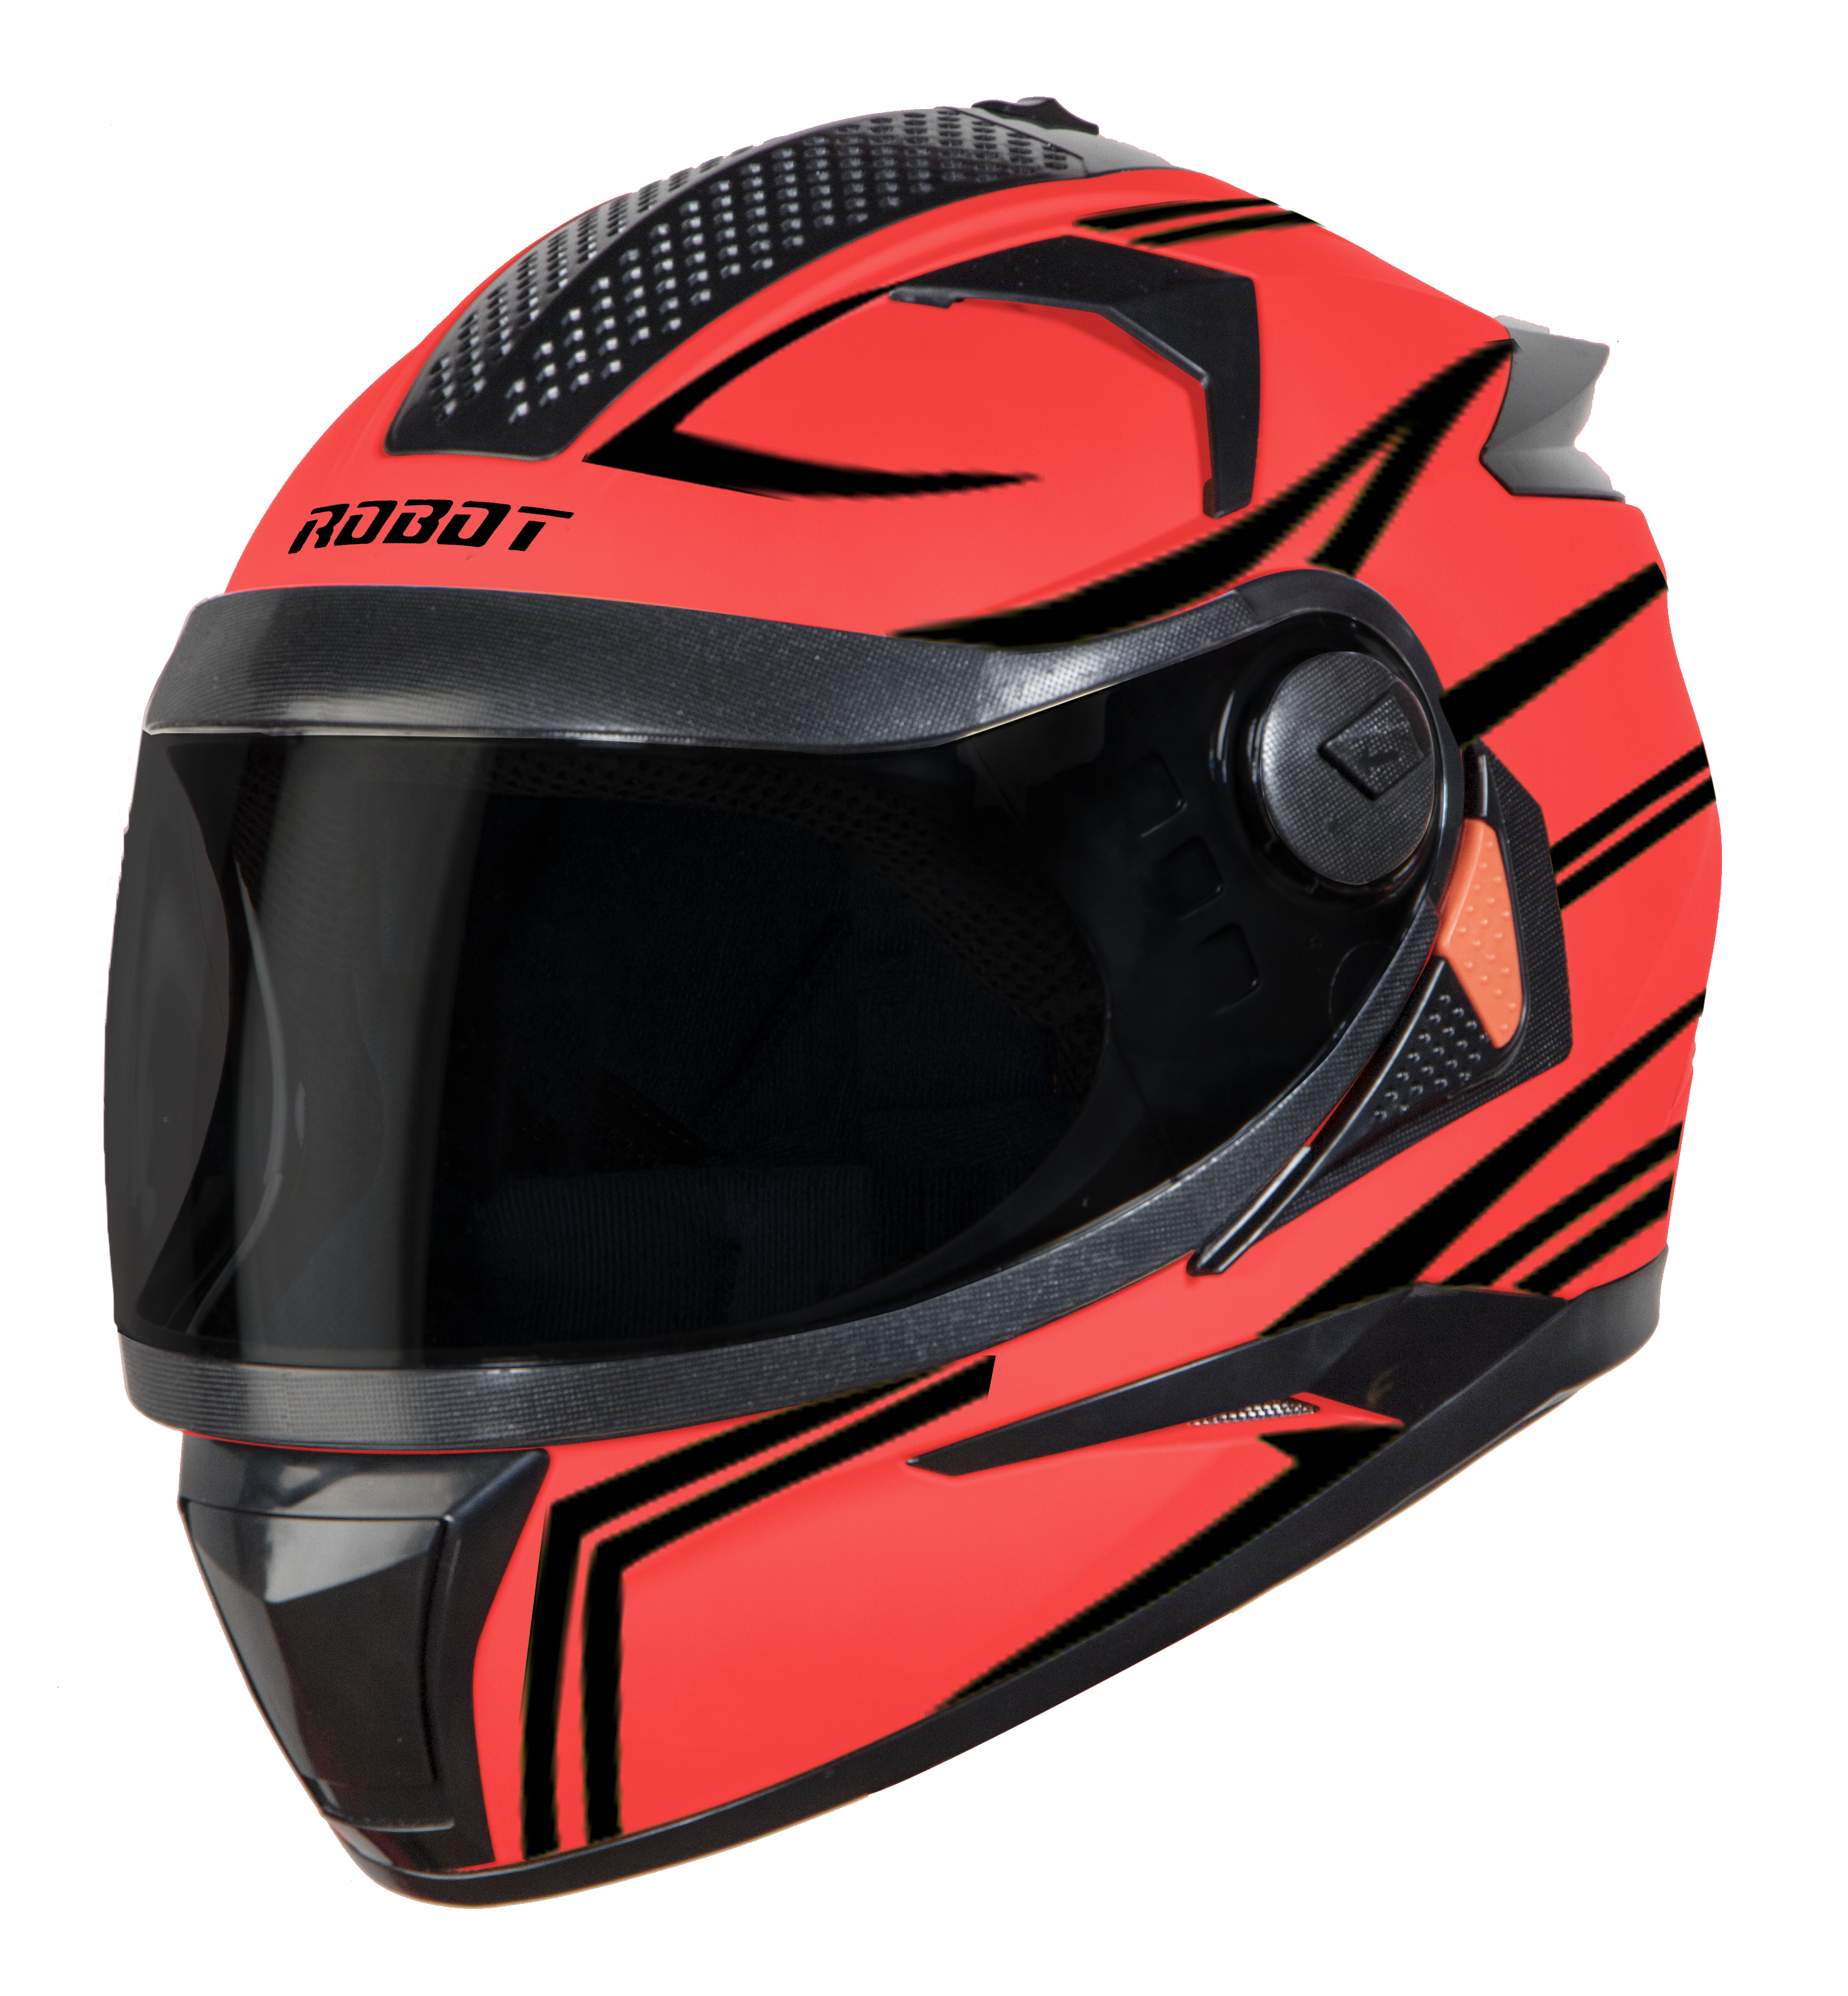 SBH-17 ROBOT REFLECTIVE GLOSSY FLUO WATERMELON (FITTED WITH CLEAR VISOR EXTRA SMOKE VISOR FREE)